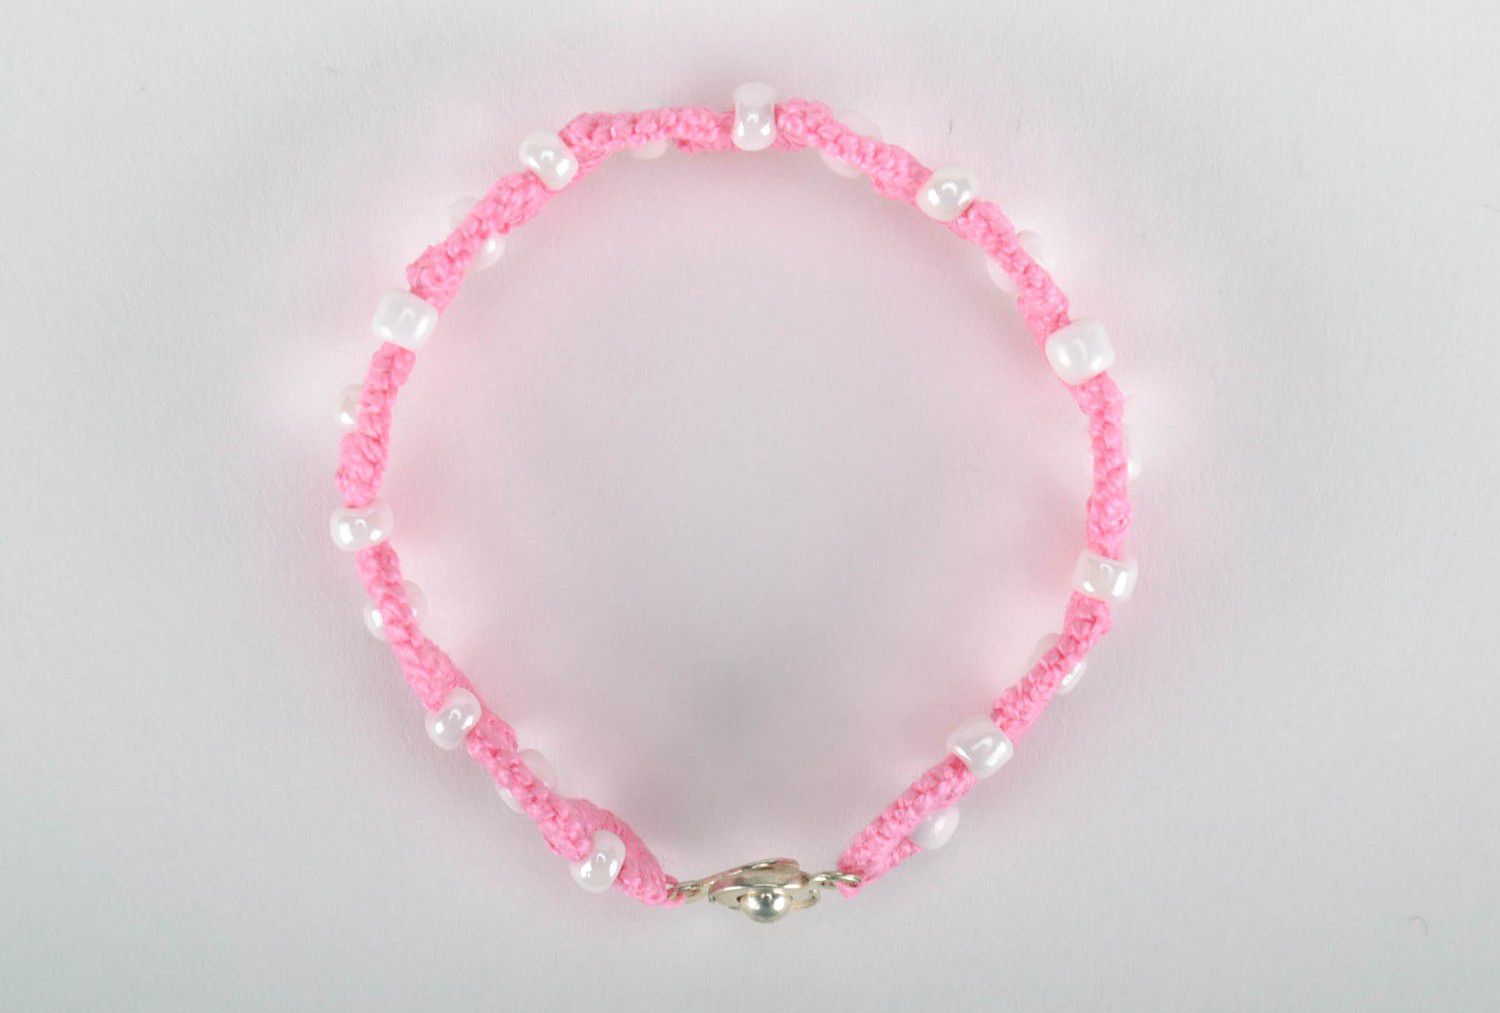 Bracelet braided from cotton threads white and pink photo 4